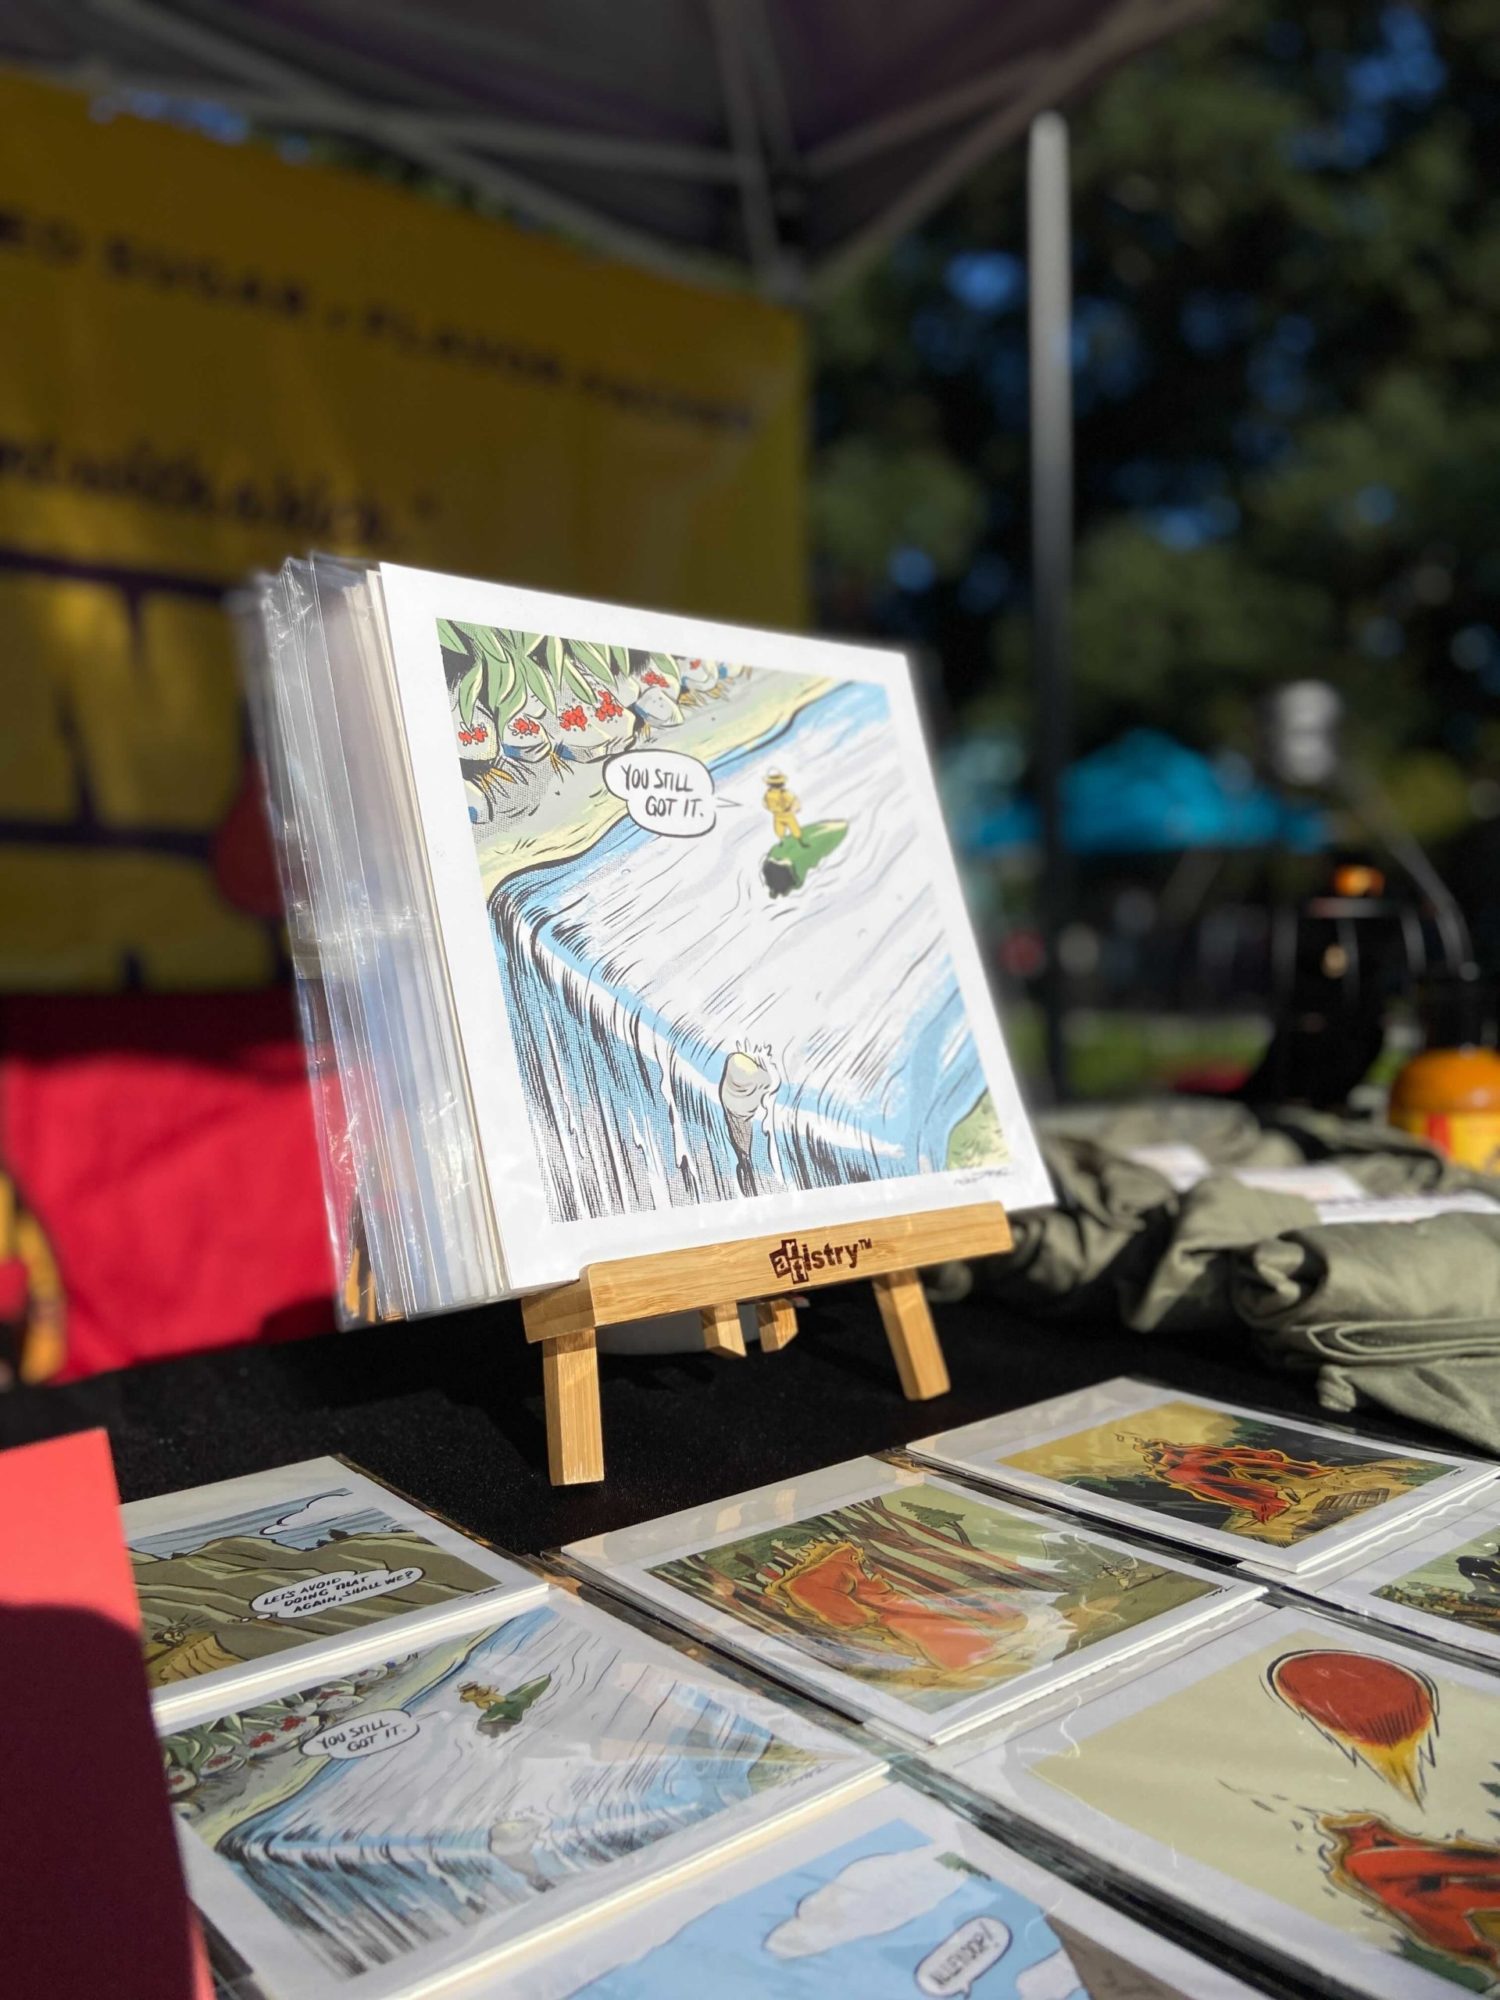 Art Prints | Burny Wild's Adventure Sauce at the Raleigh Night Market in Downtown Raleigh, NC